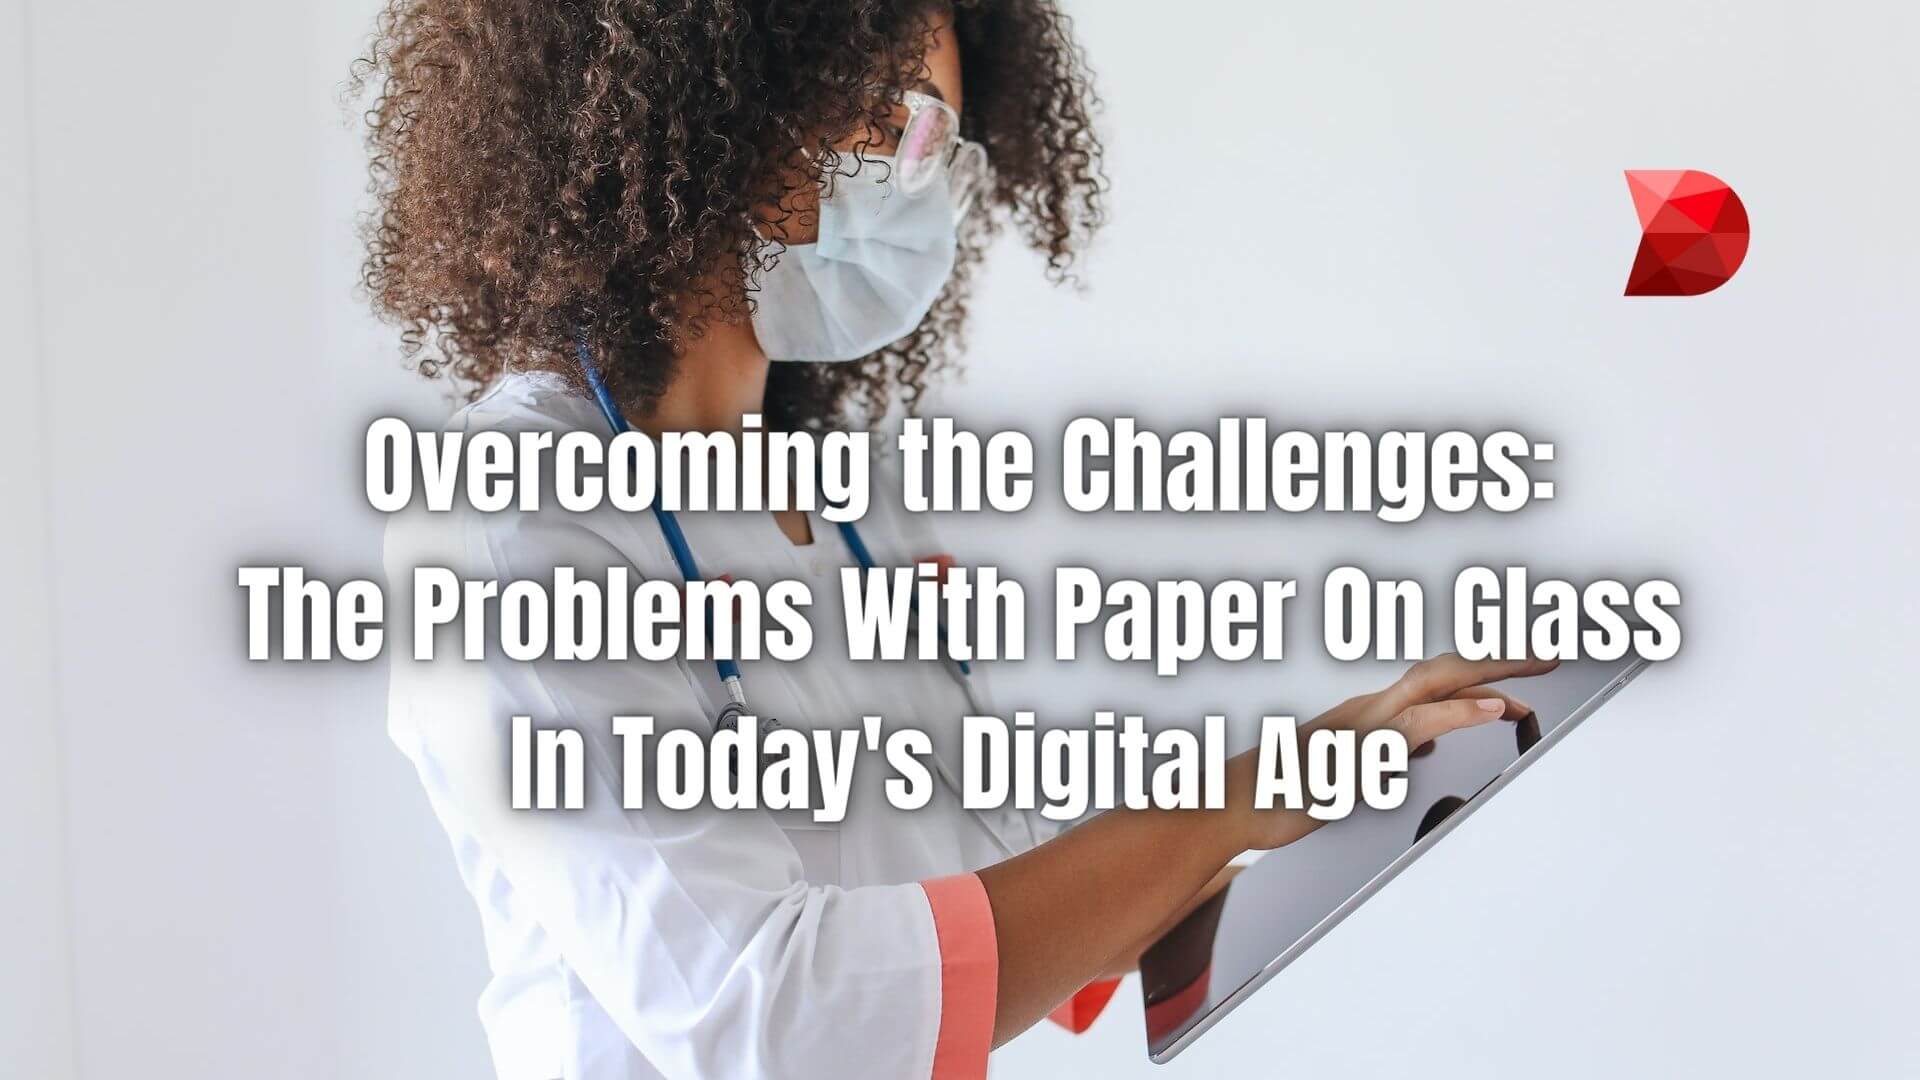 Overcoming the challenges of 'Paper on Glass' is not just about choosing a flashy, feature-rich solution. Learn how to overcome them!